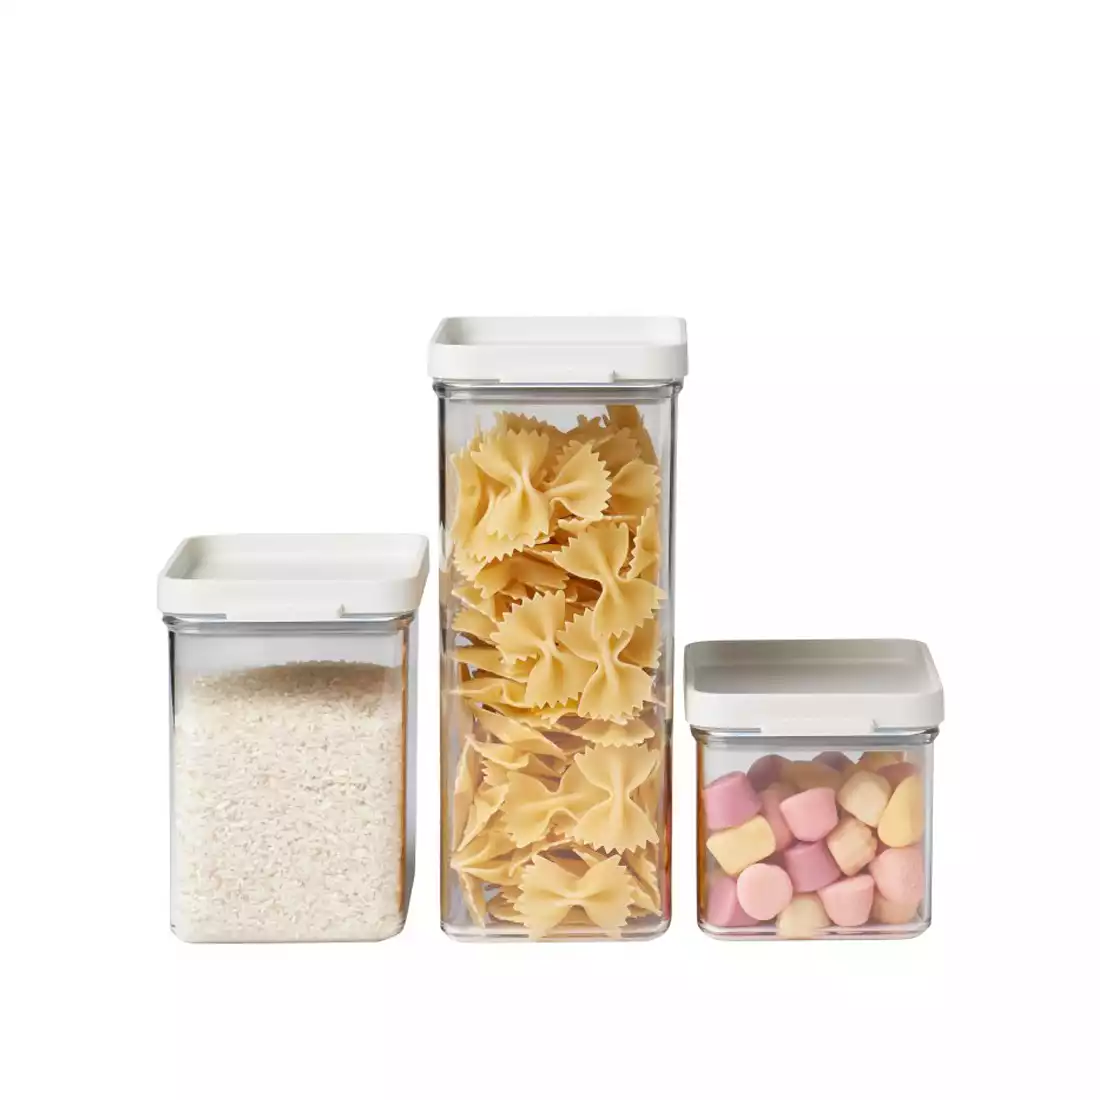 MEPAL OMNIA set of 3 food containers, white